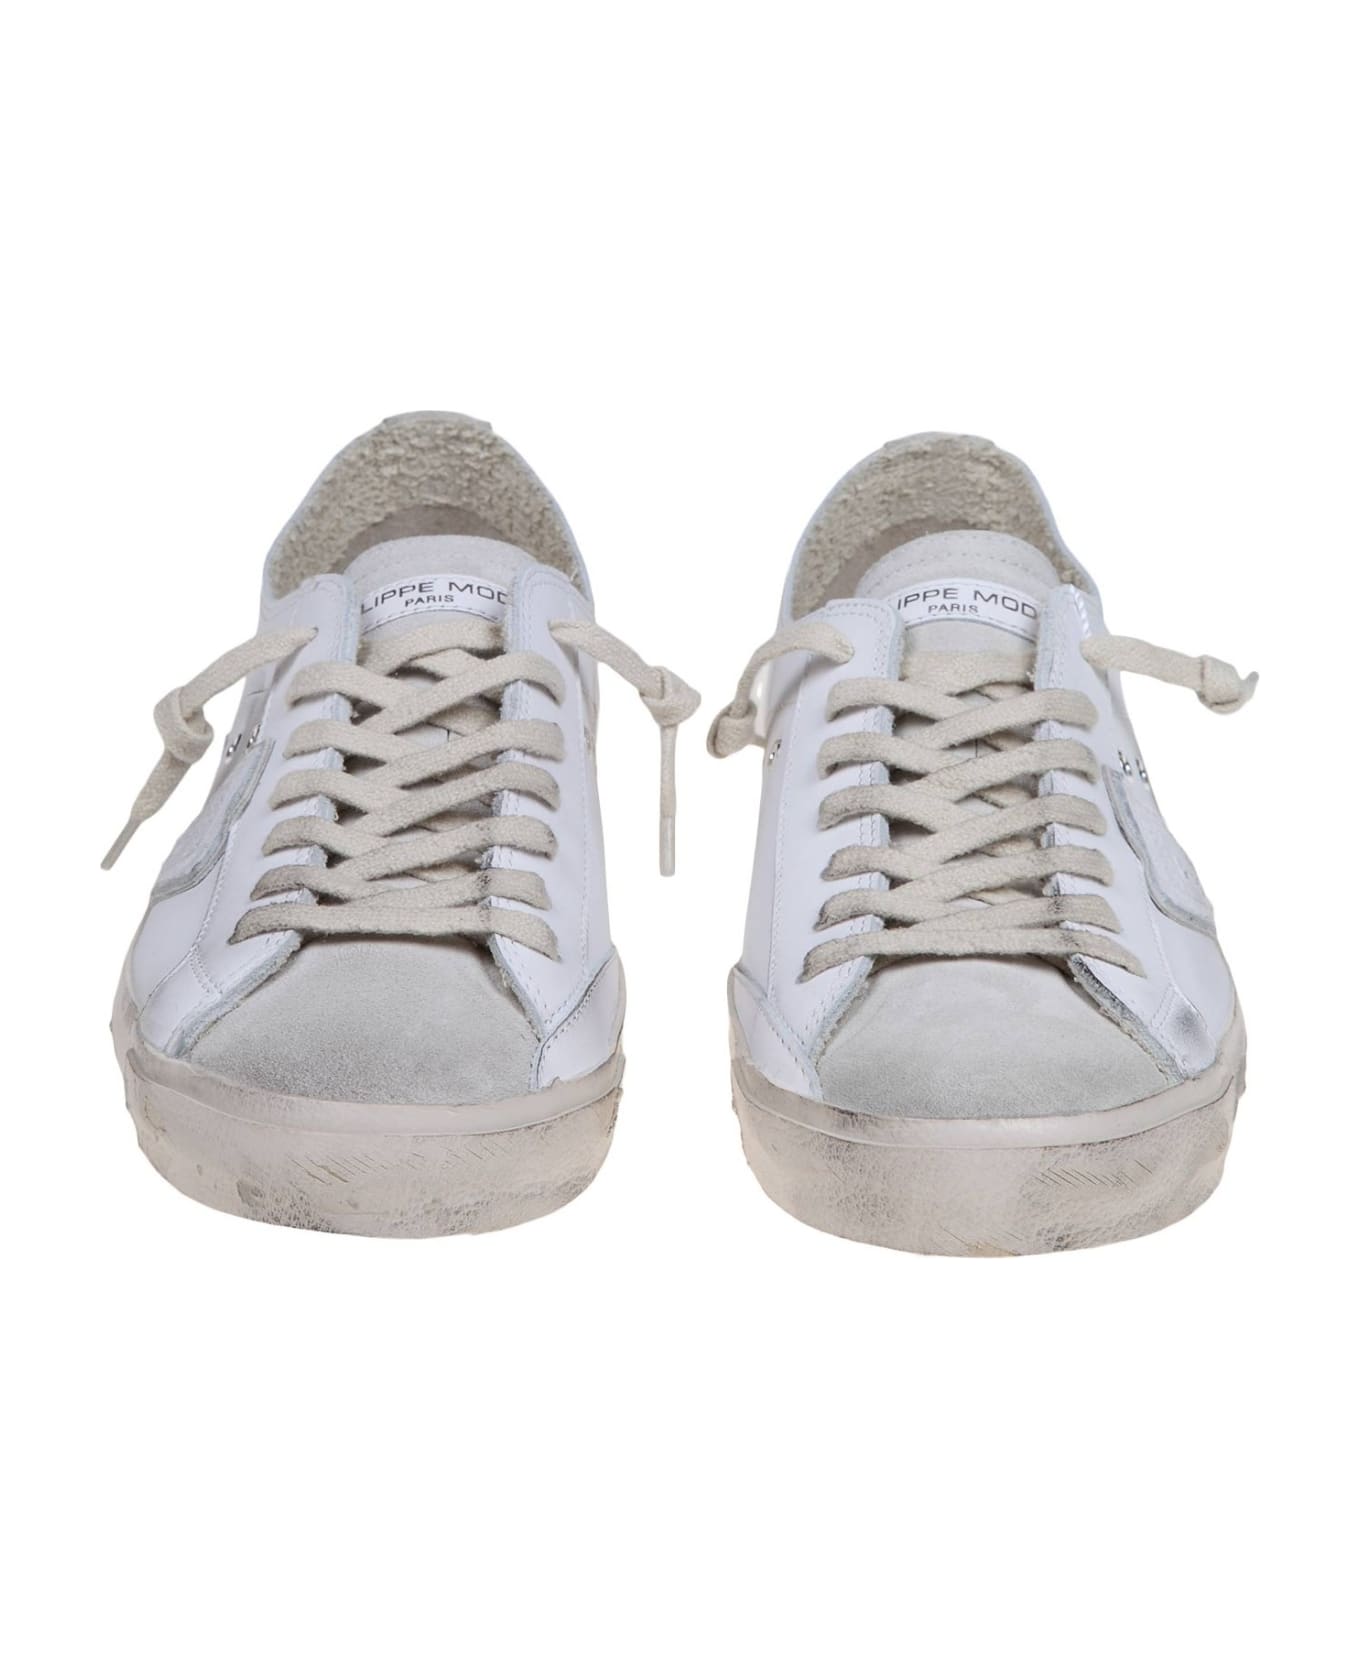 Philippe Model Prsx Low Sneakers In White Leather And Suede - WHITE/GREY